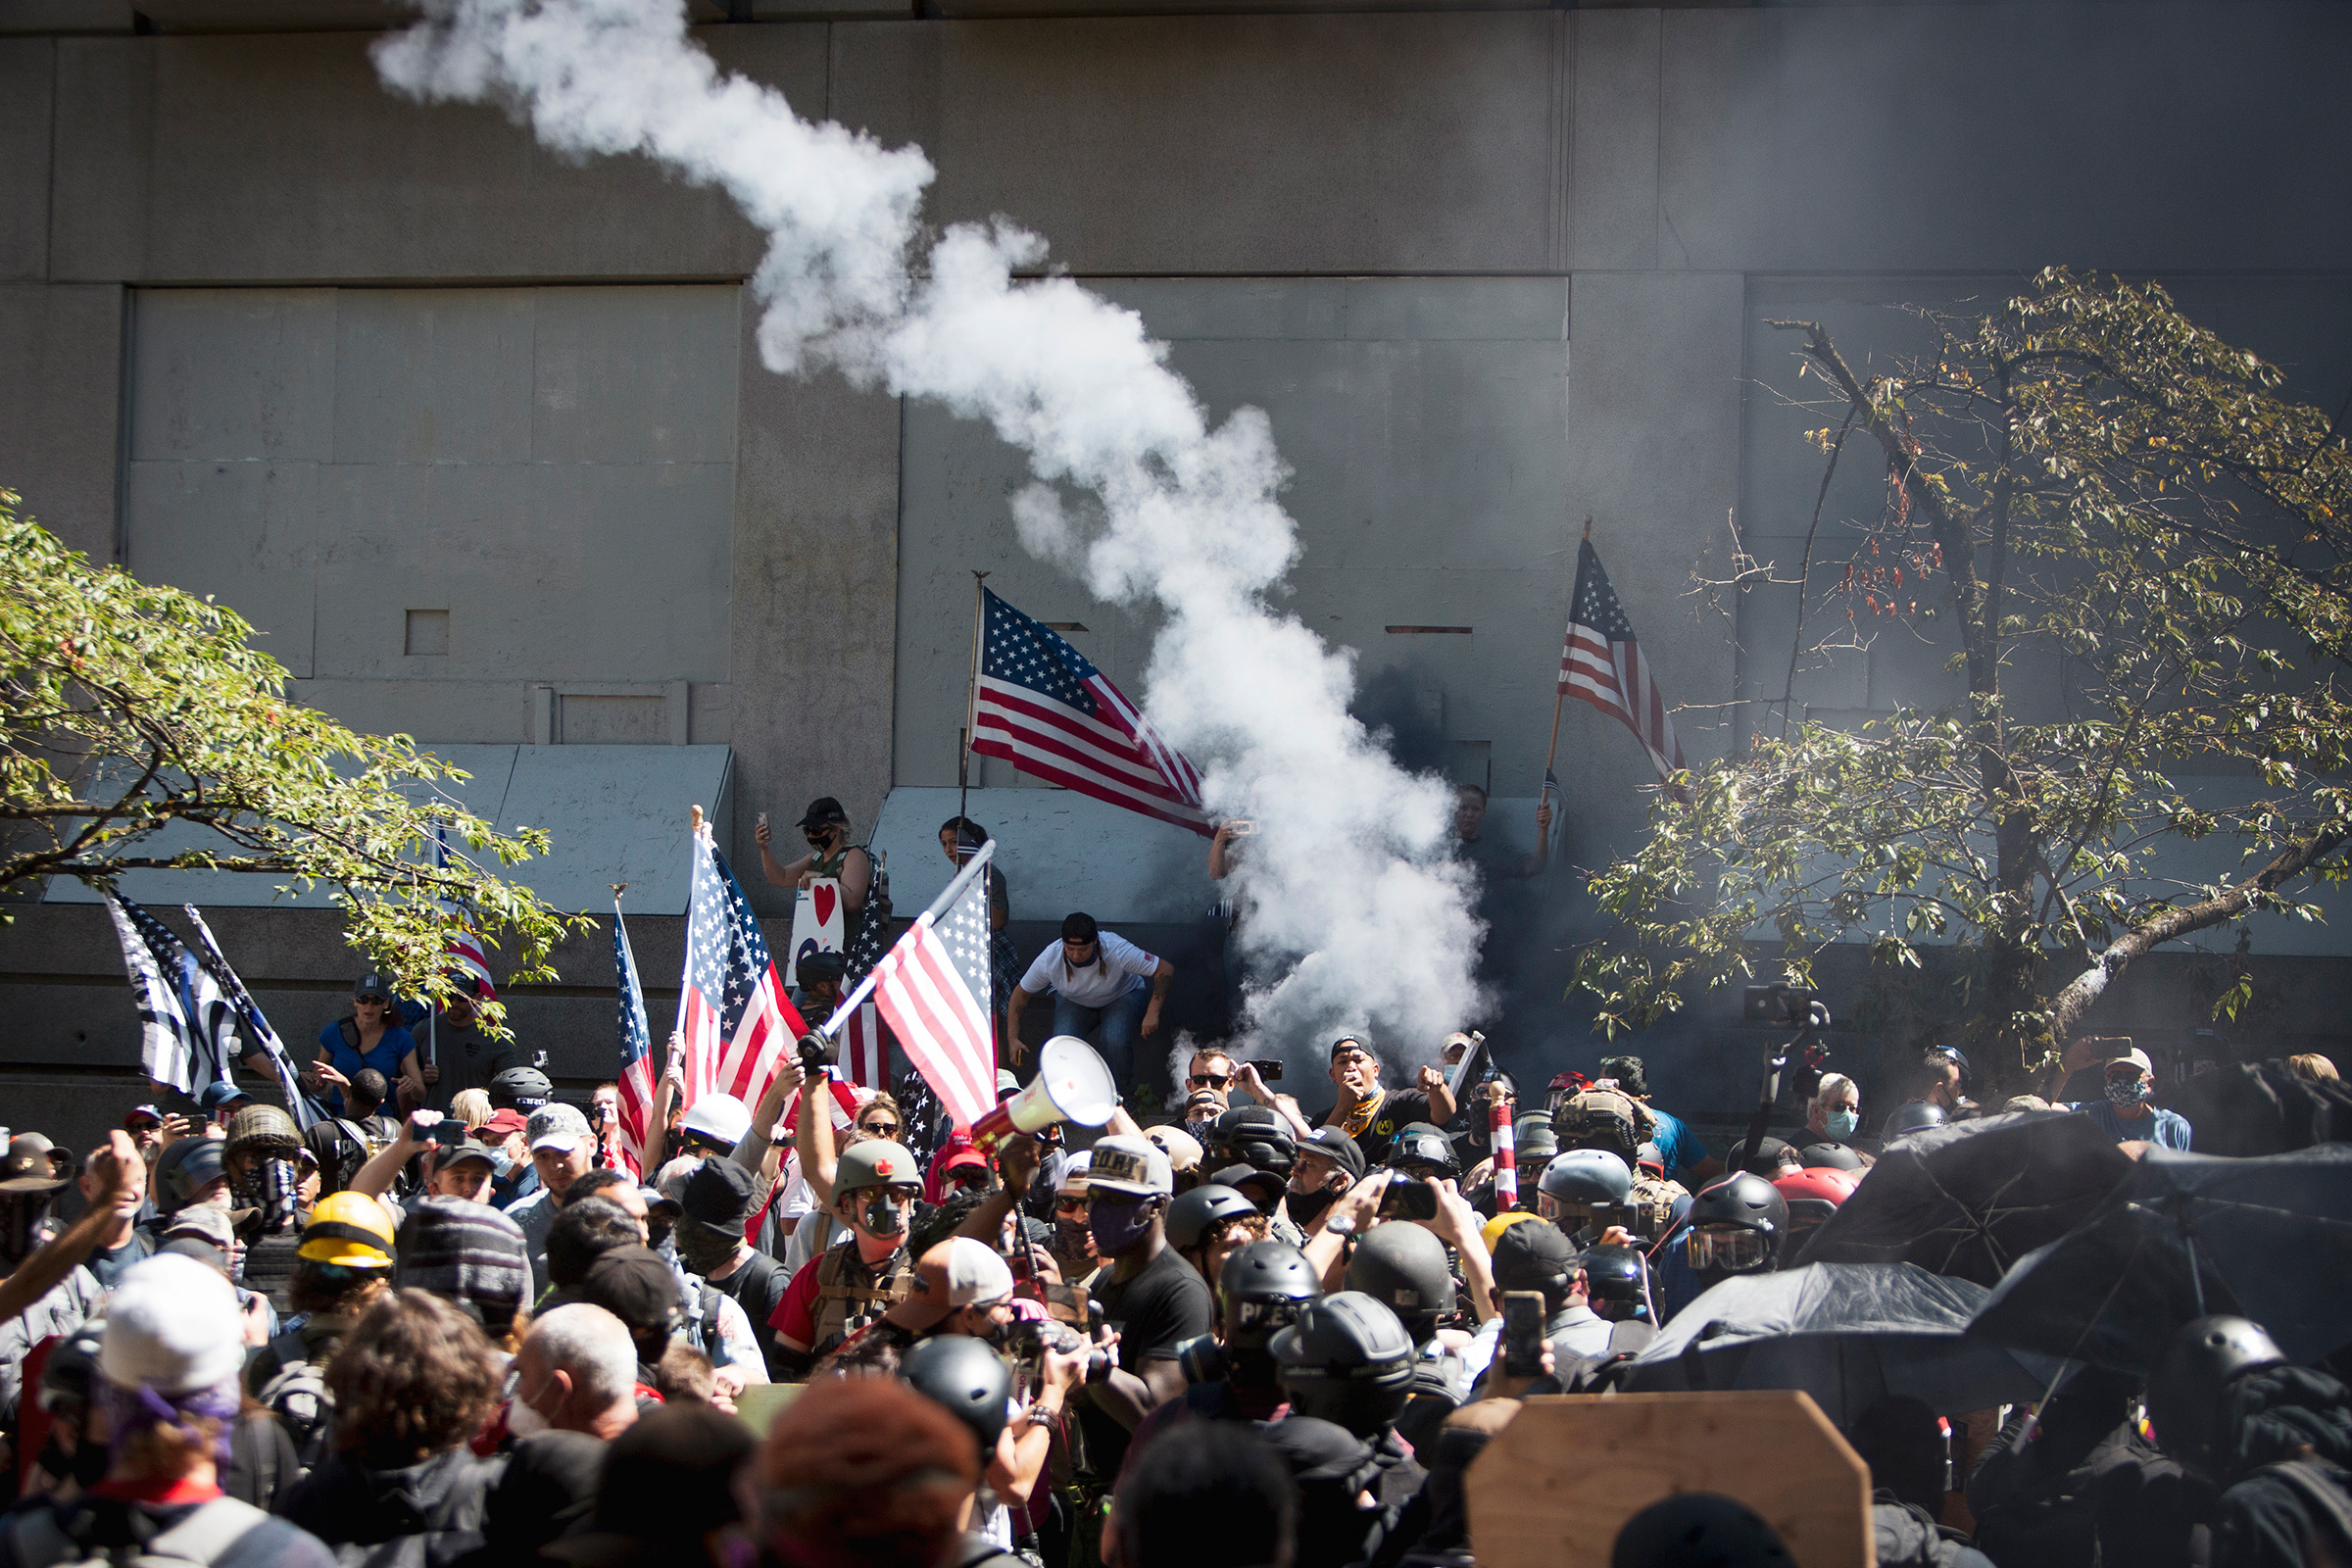 Far-right protesters clash with left-wing counter­protesters at the Justice Center in Portland, Ore., on Aug. 22 (Brooke Herbert—The Oregonian/AP)